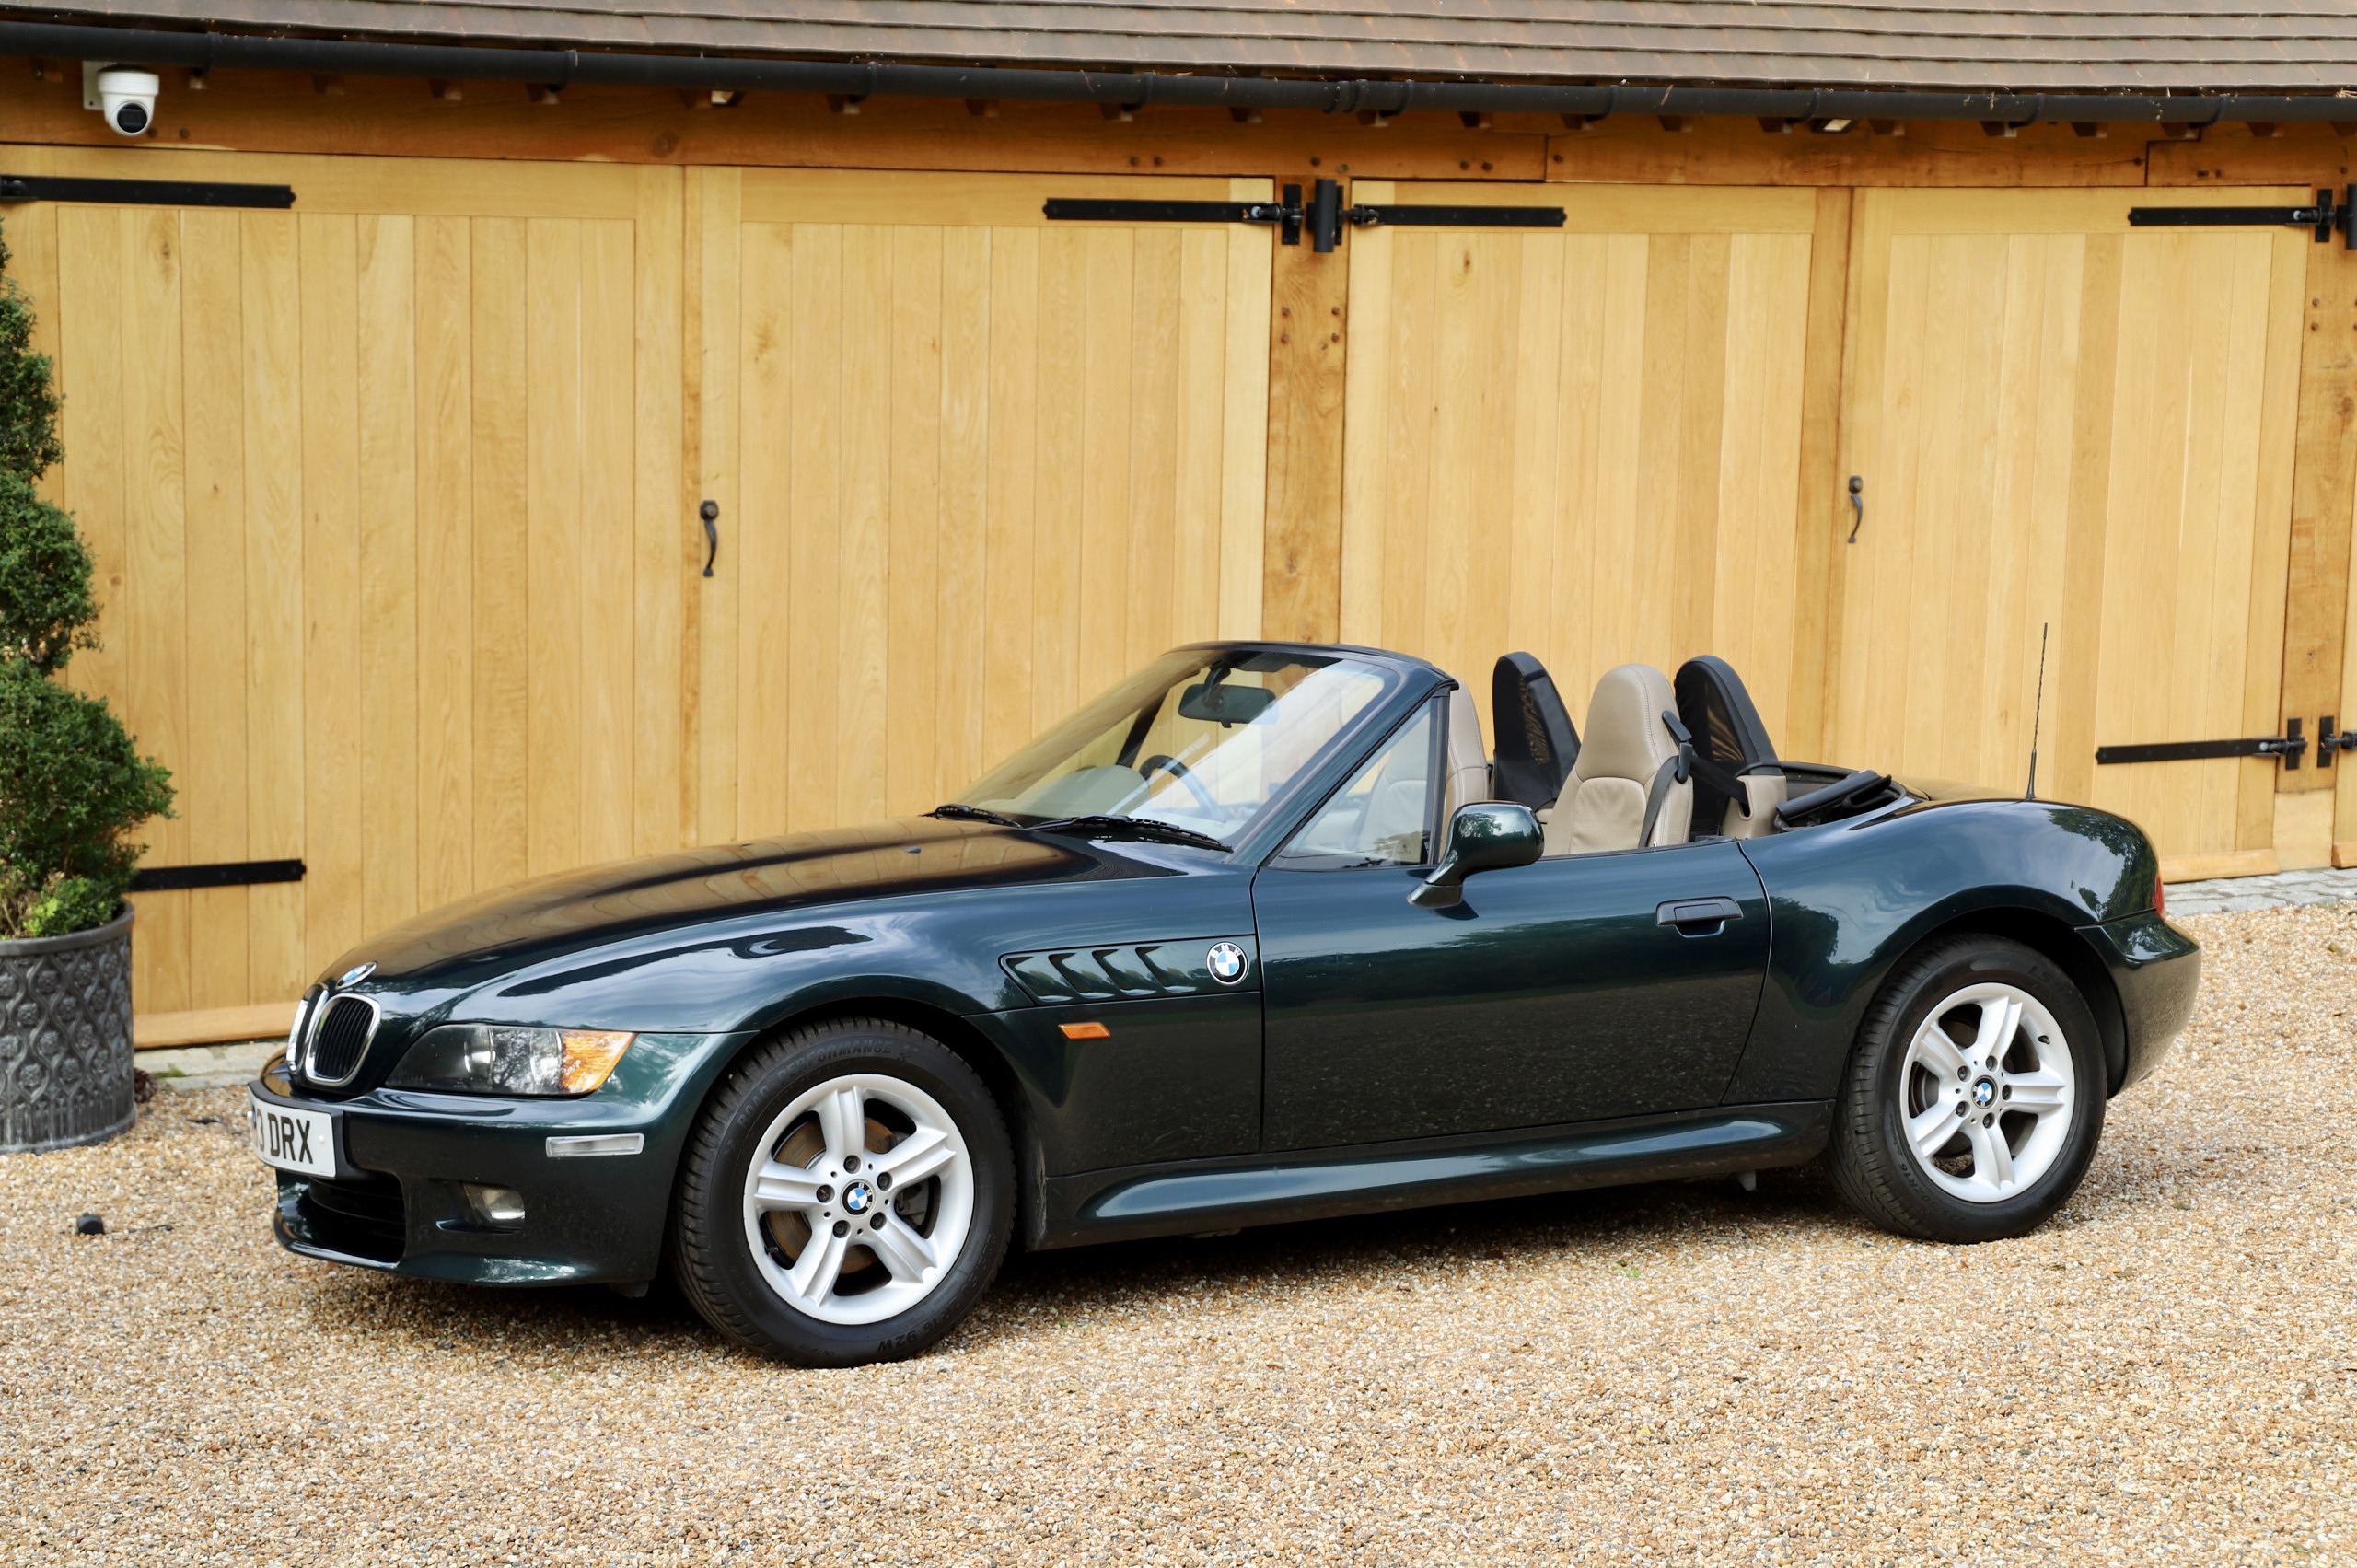 BMW Z3, 2.0i Roadster, 2000. Stunning Oxford Green metallic with